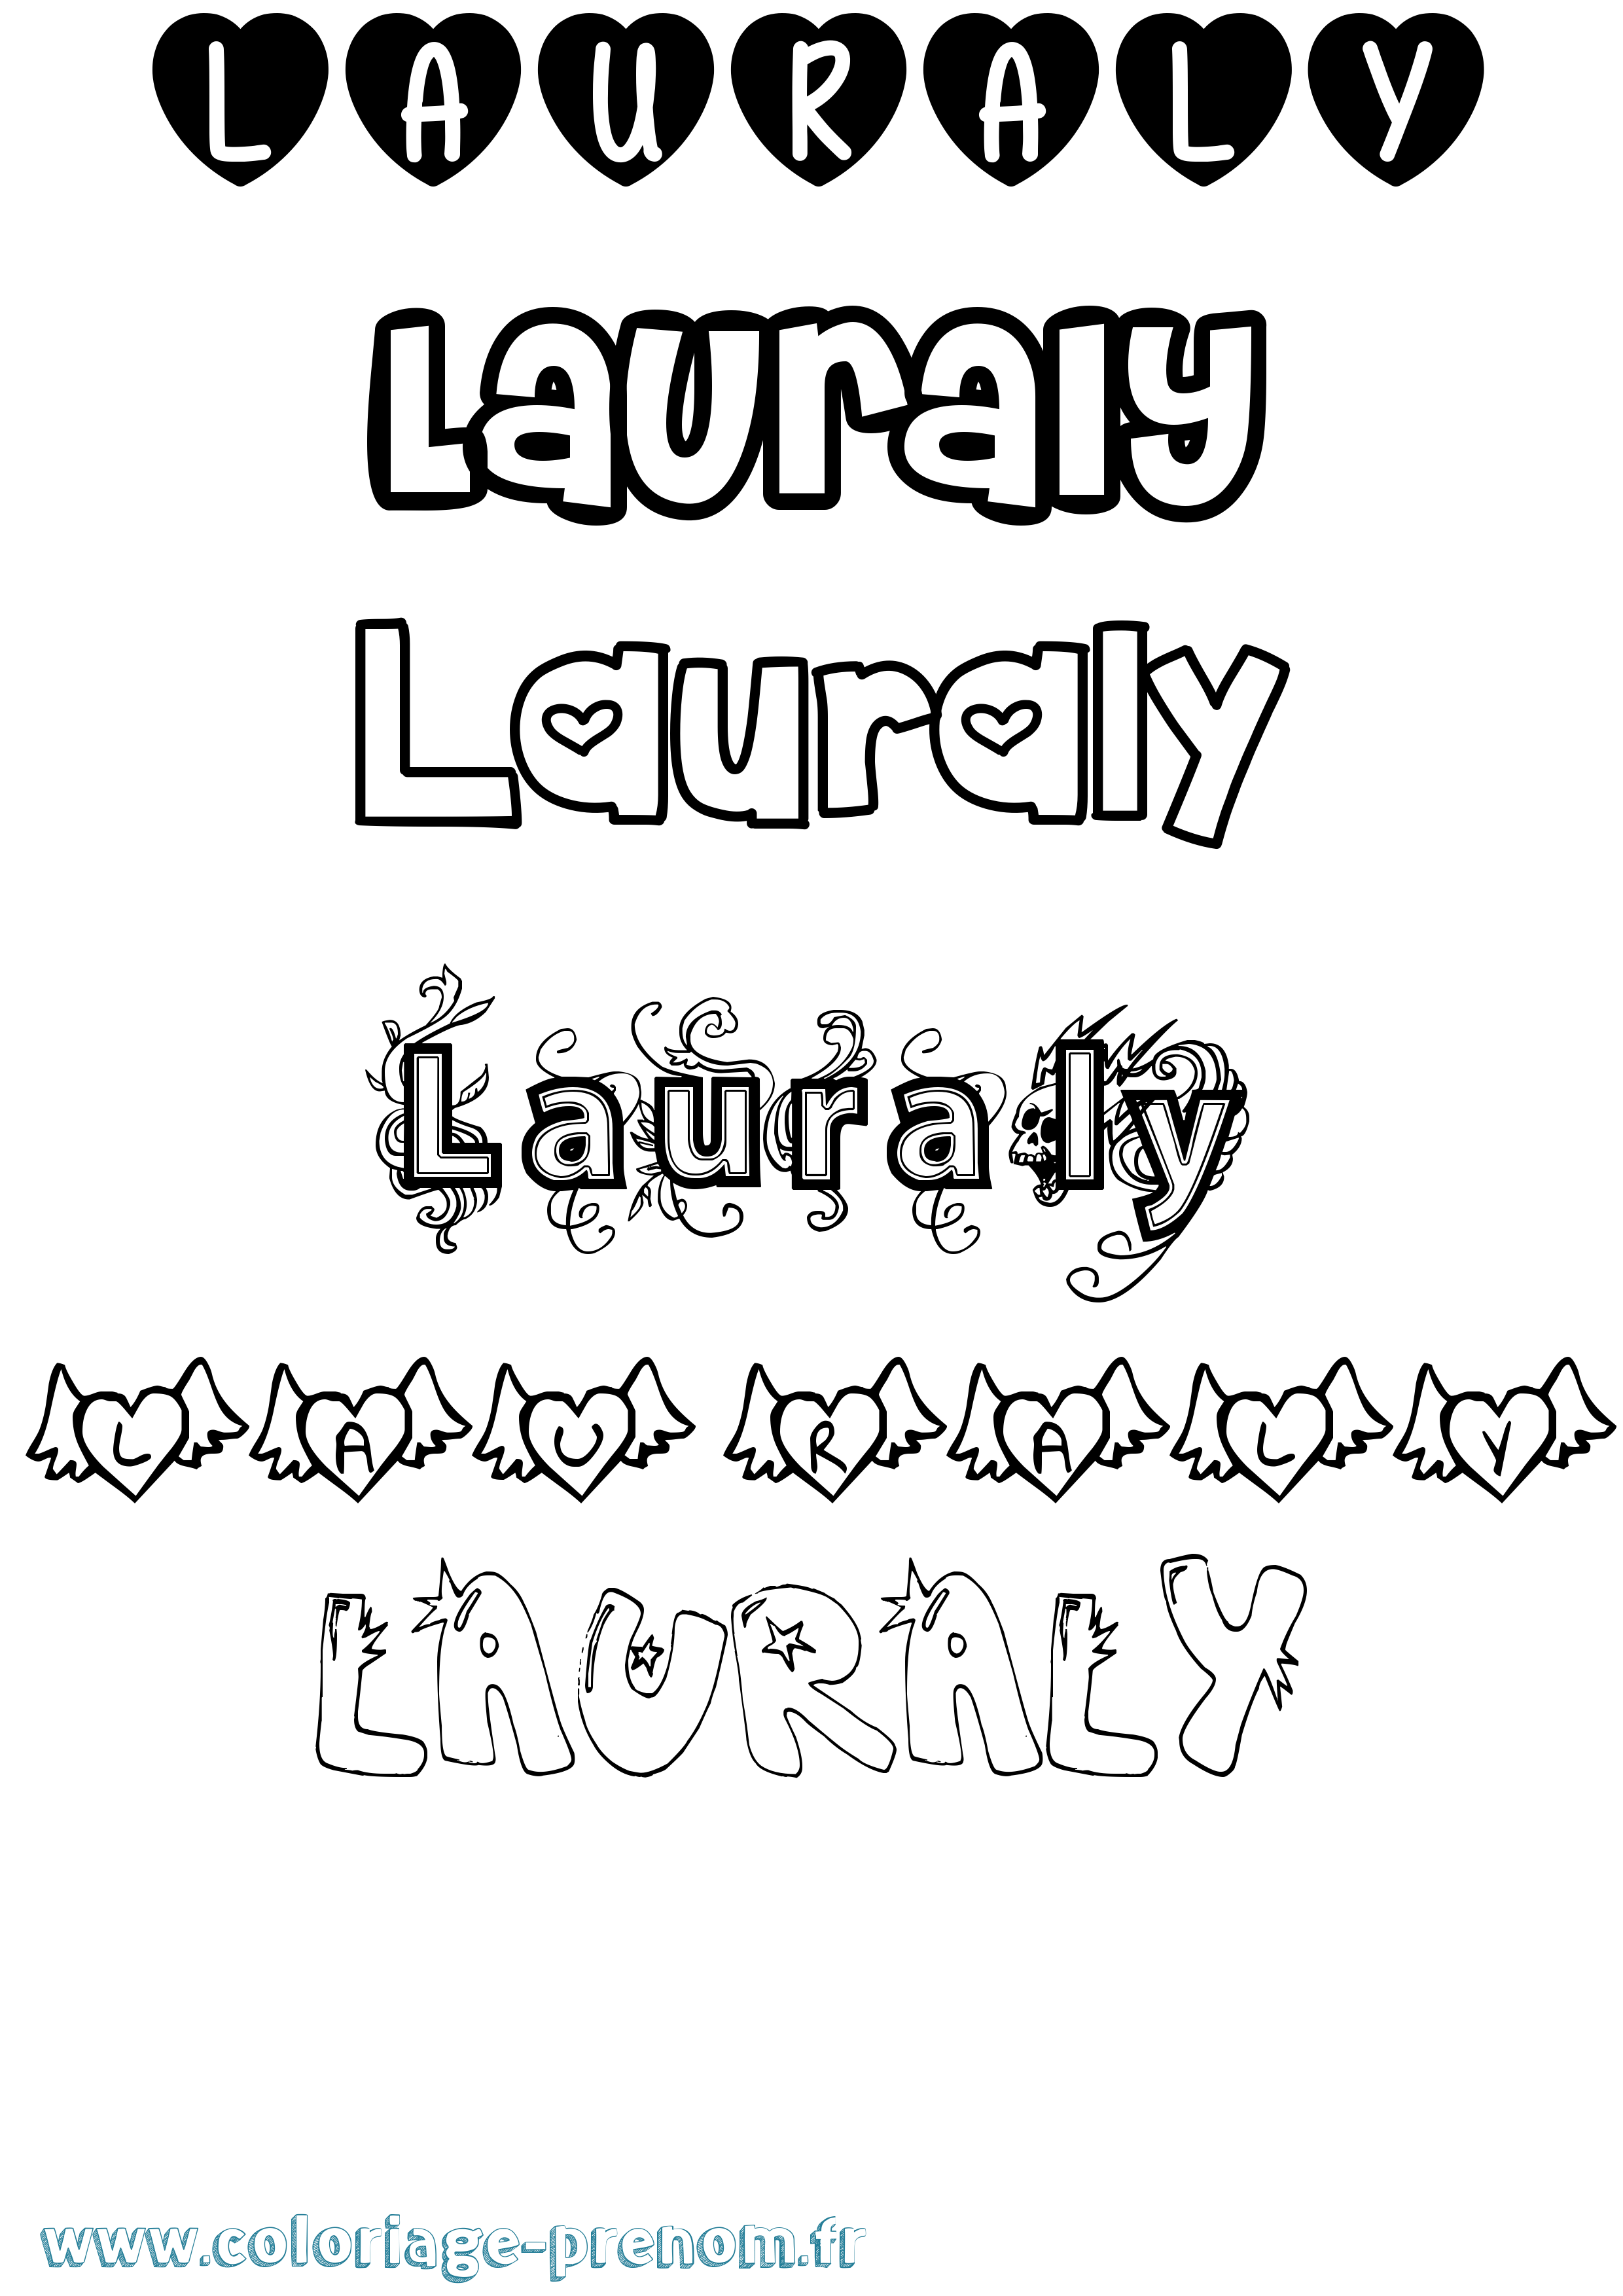 Coloriage prénom Lauraly Girly